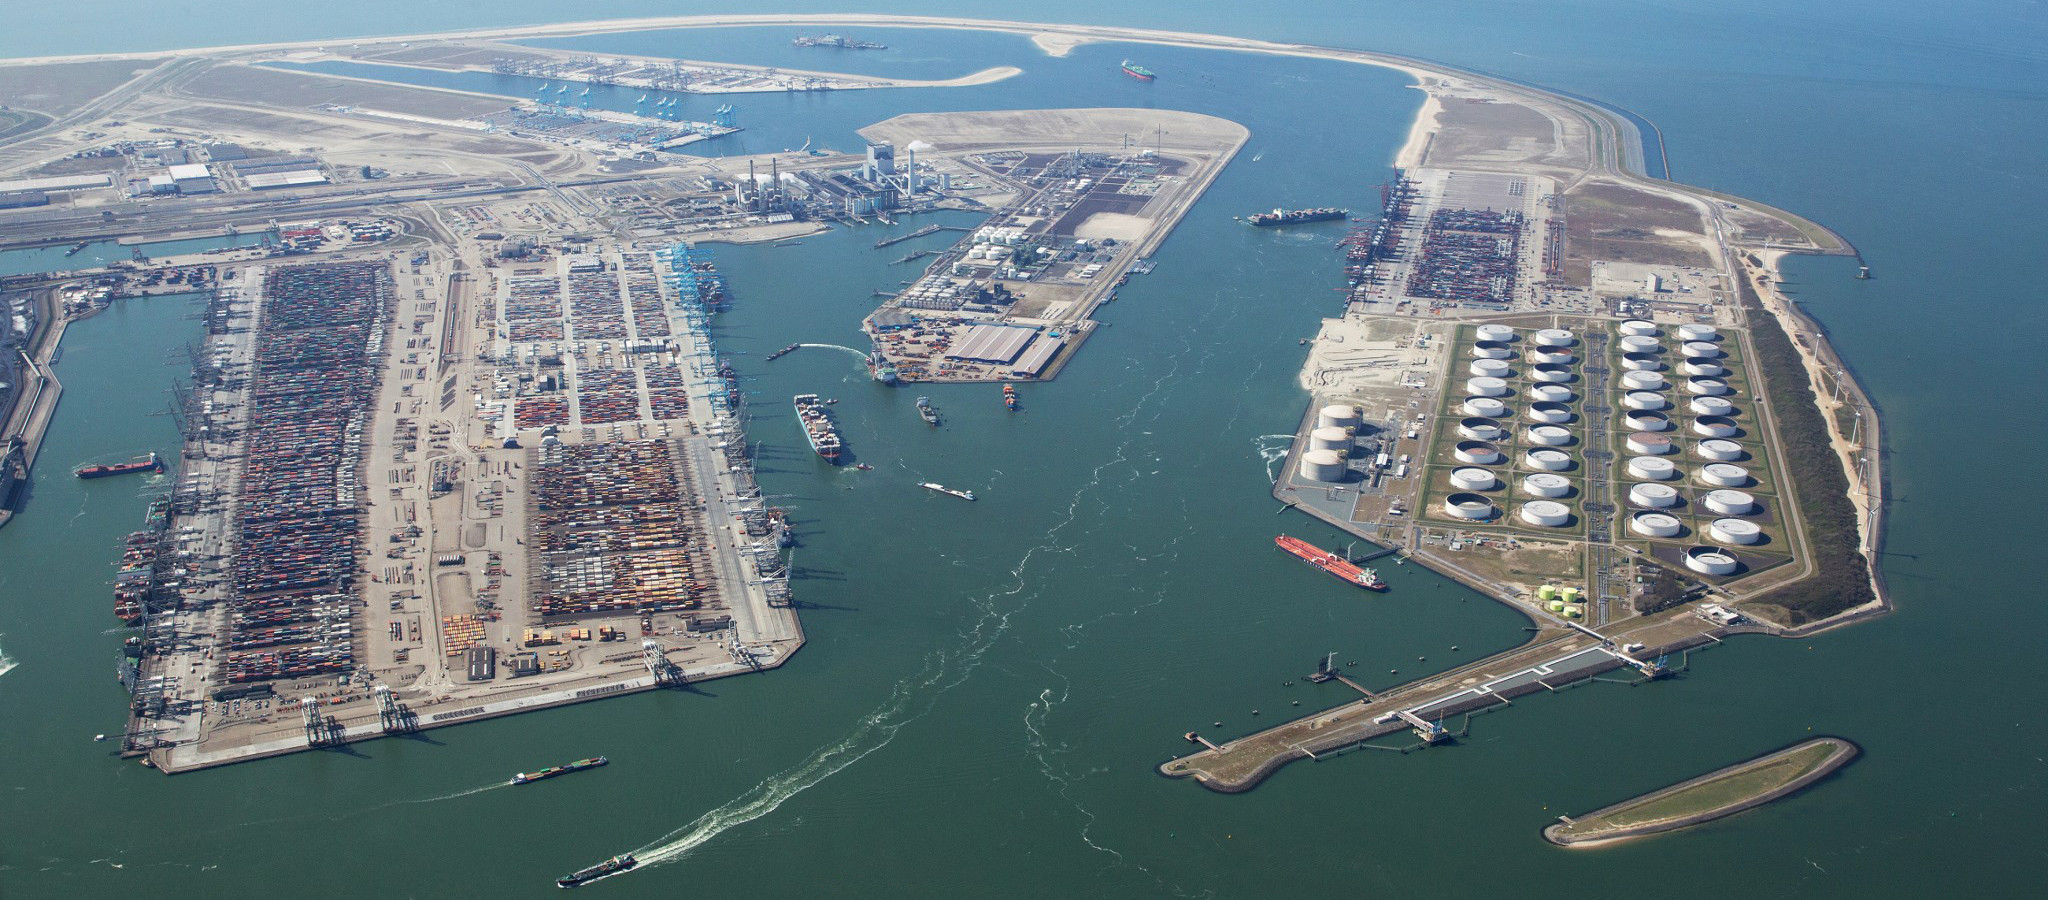 Aerial view of the Maasvlakte 2 addition to Rotterdam harbour